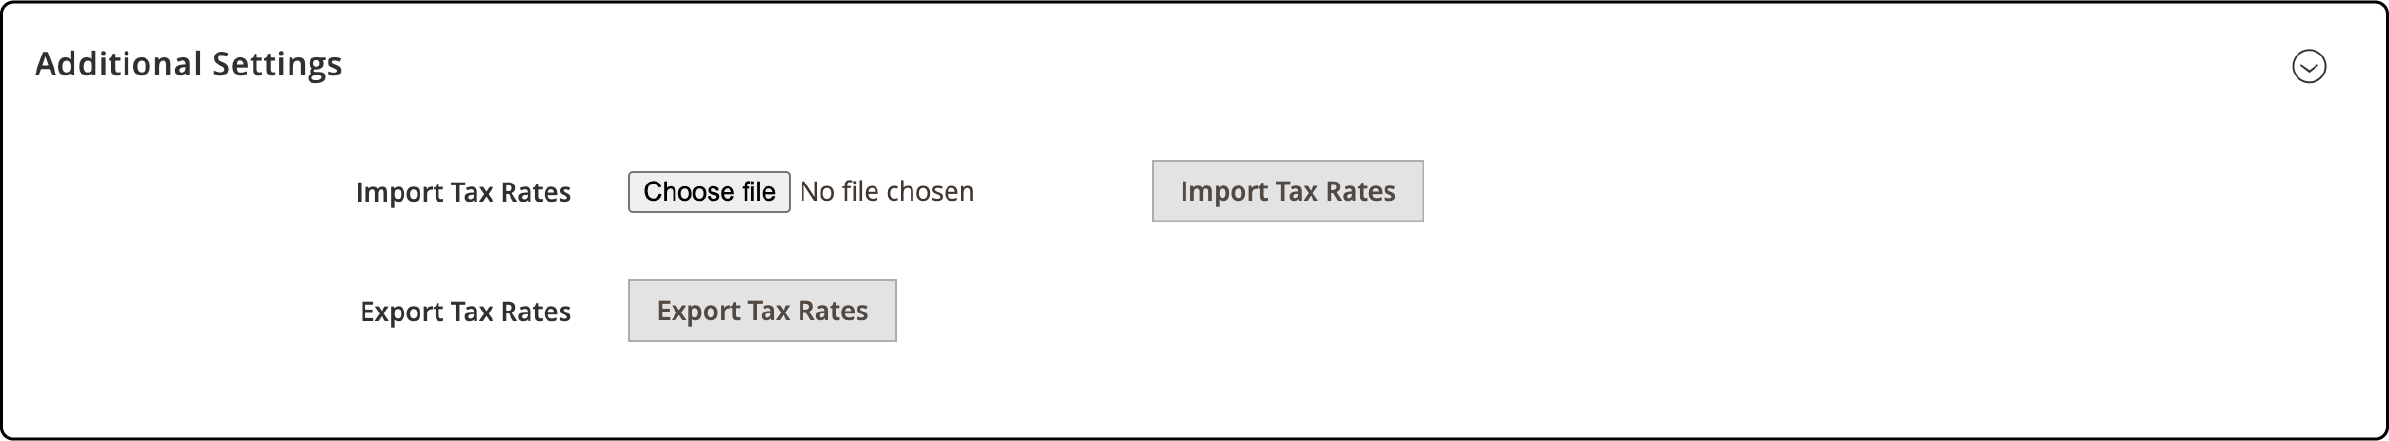 Importing Tax Rates in Magento 2